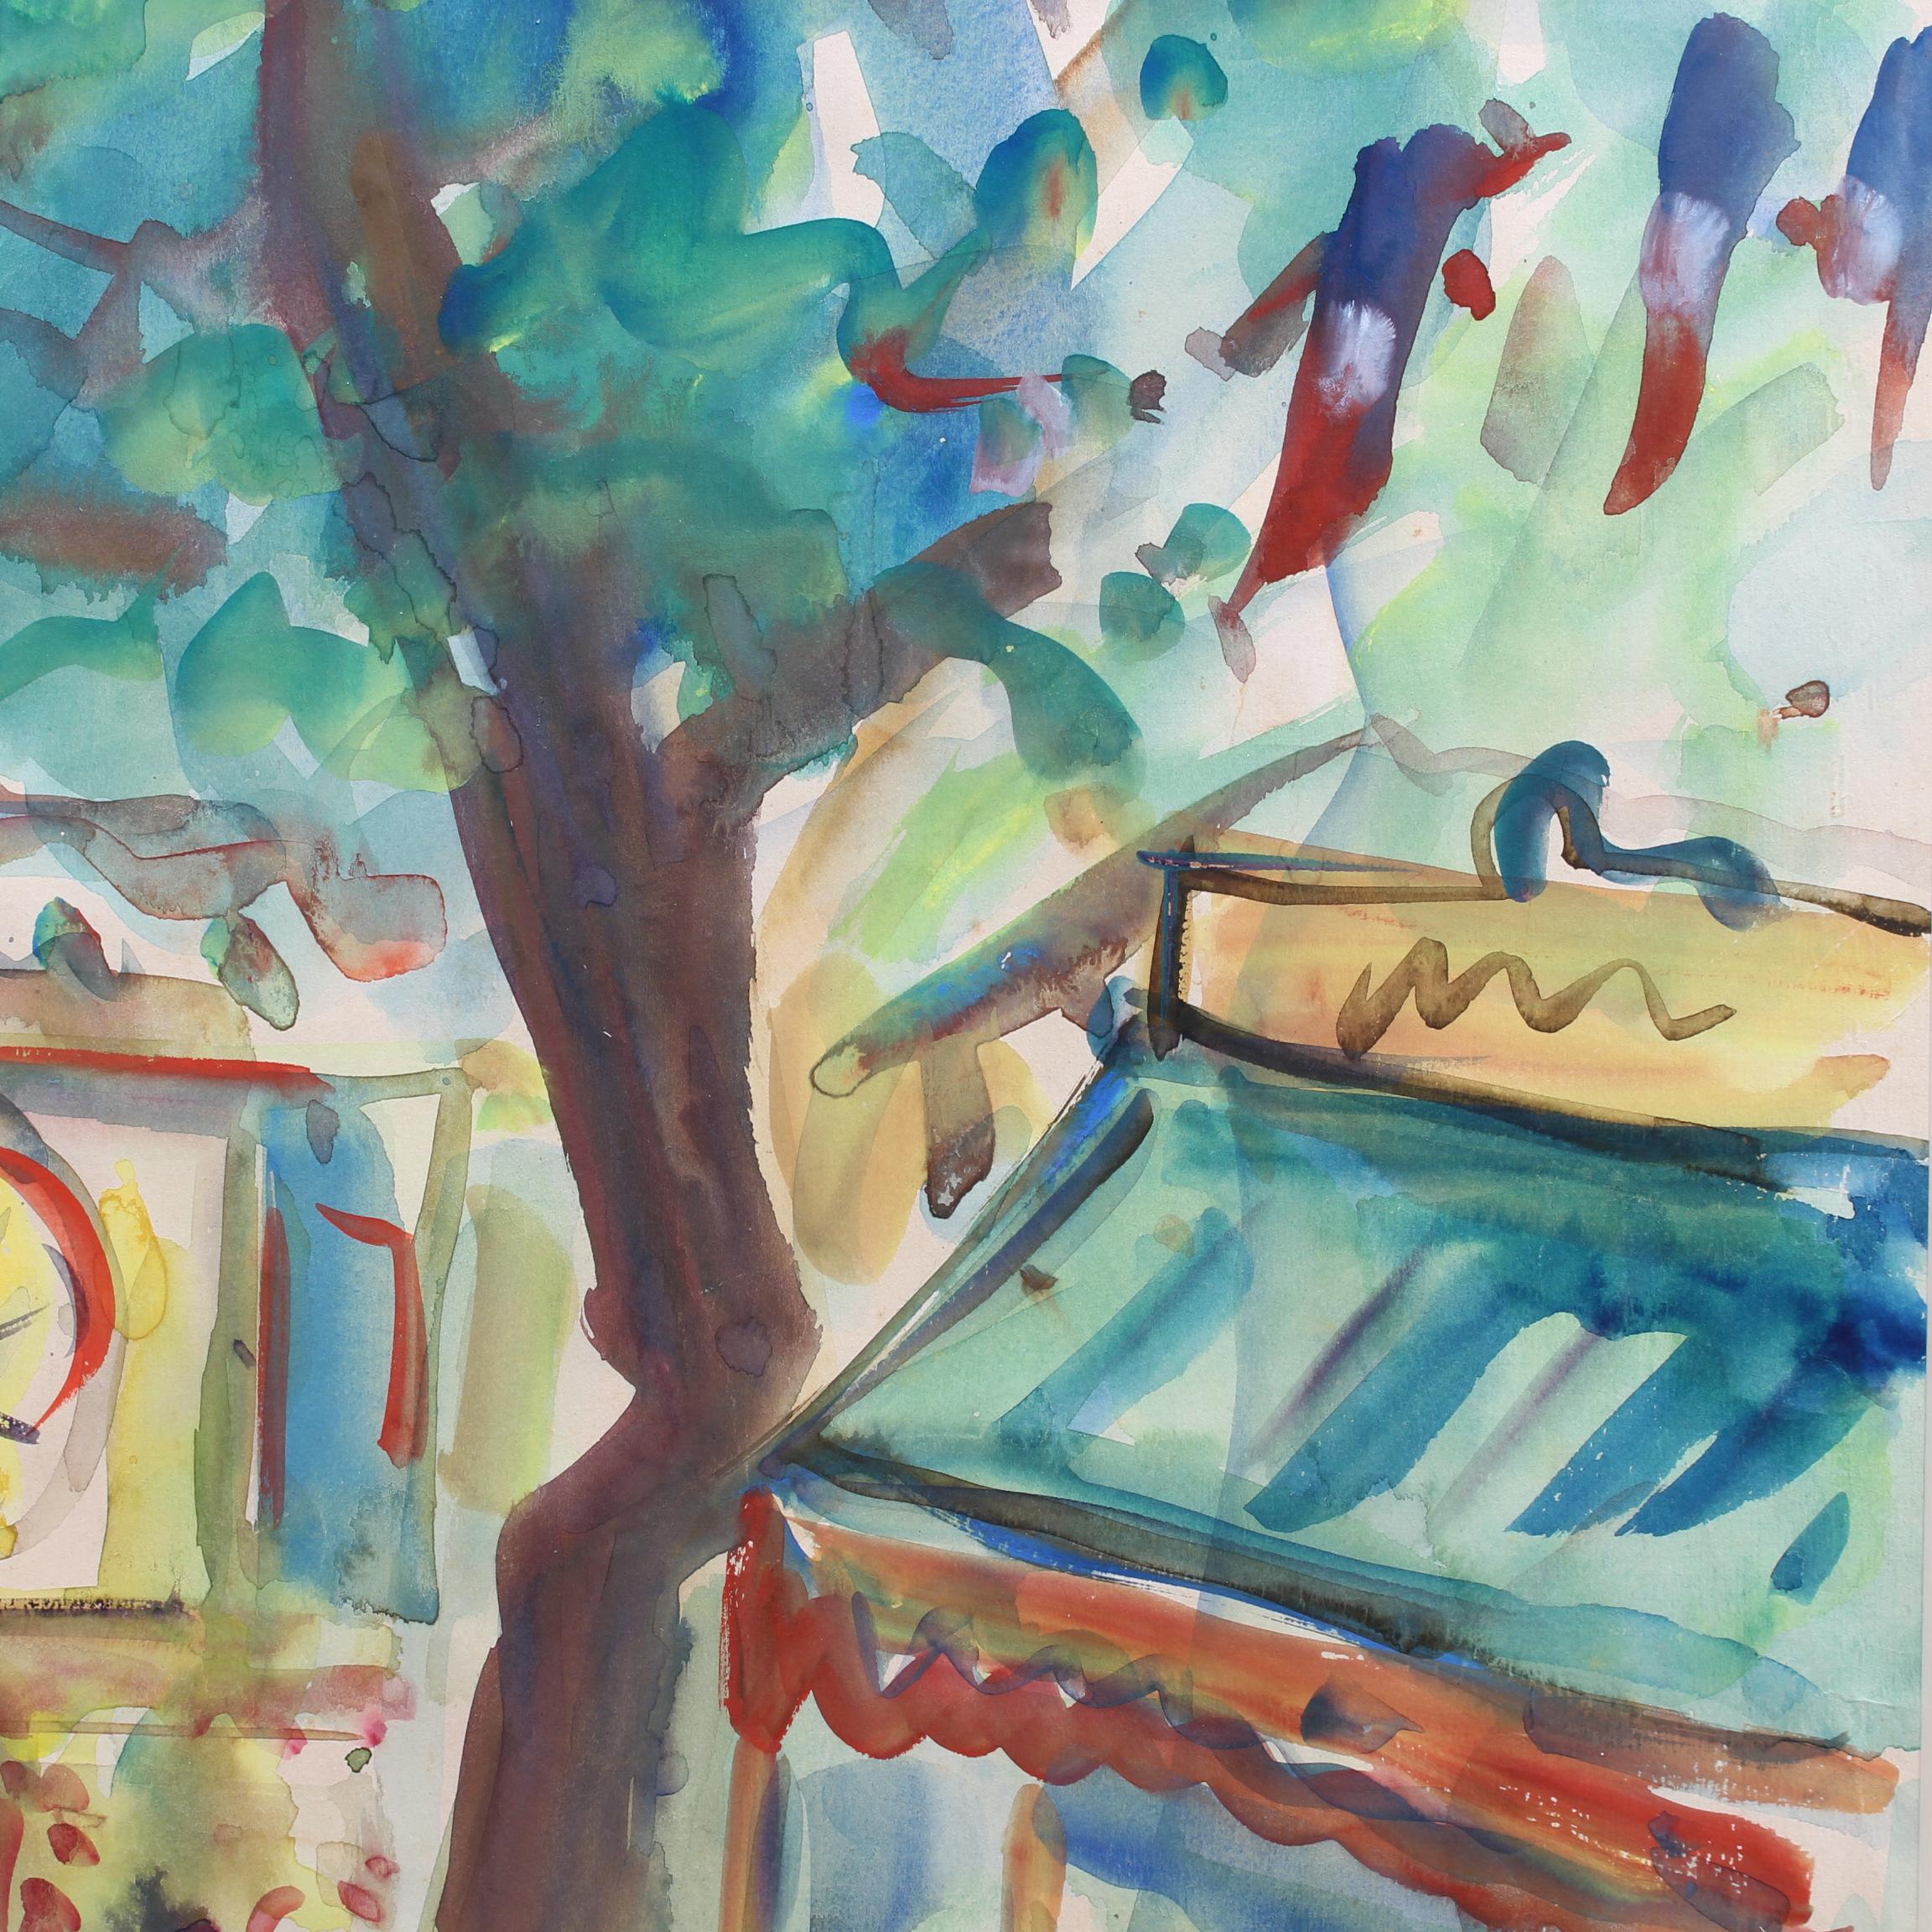 'Parisian Funfair', watercolour on art paper, by French artist, Roland DuBuc (circa 1970s). There is nothing like celebrating summer than an outdoor fun fair under the trees. Each summer, roving carnivals and funfairs seize the villages of la